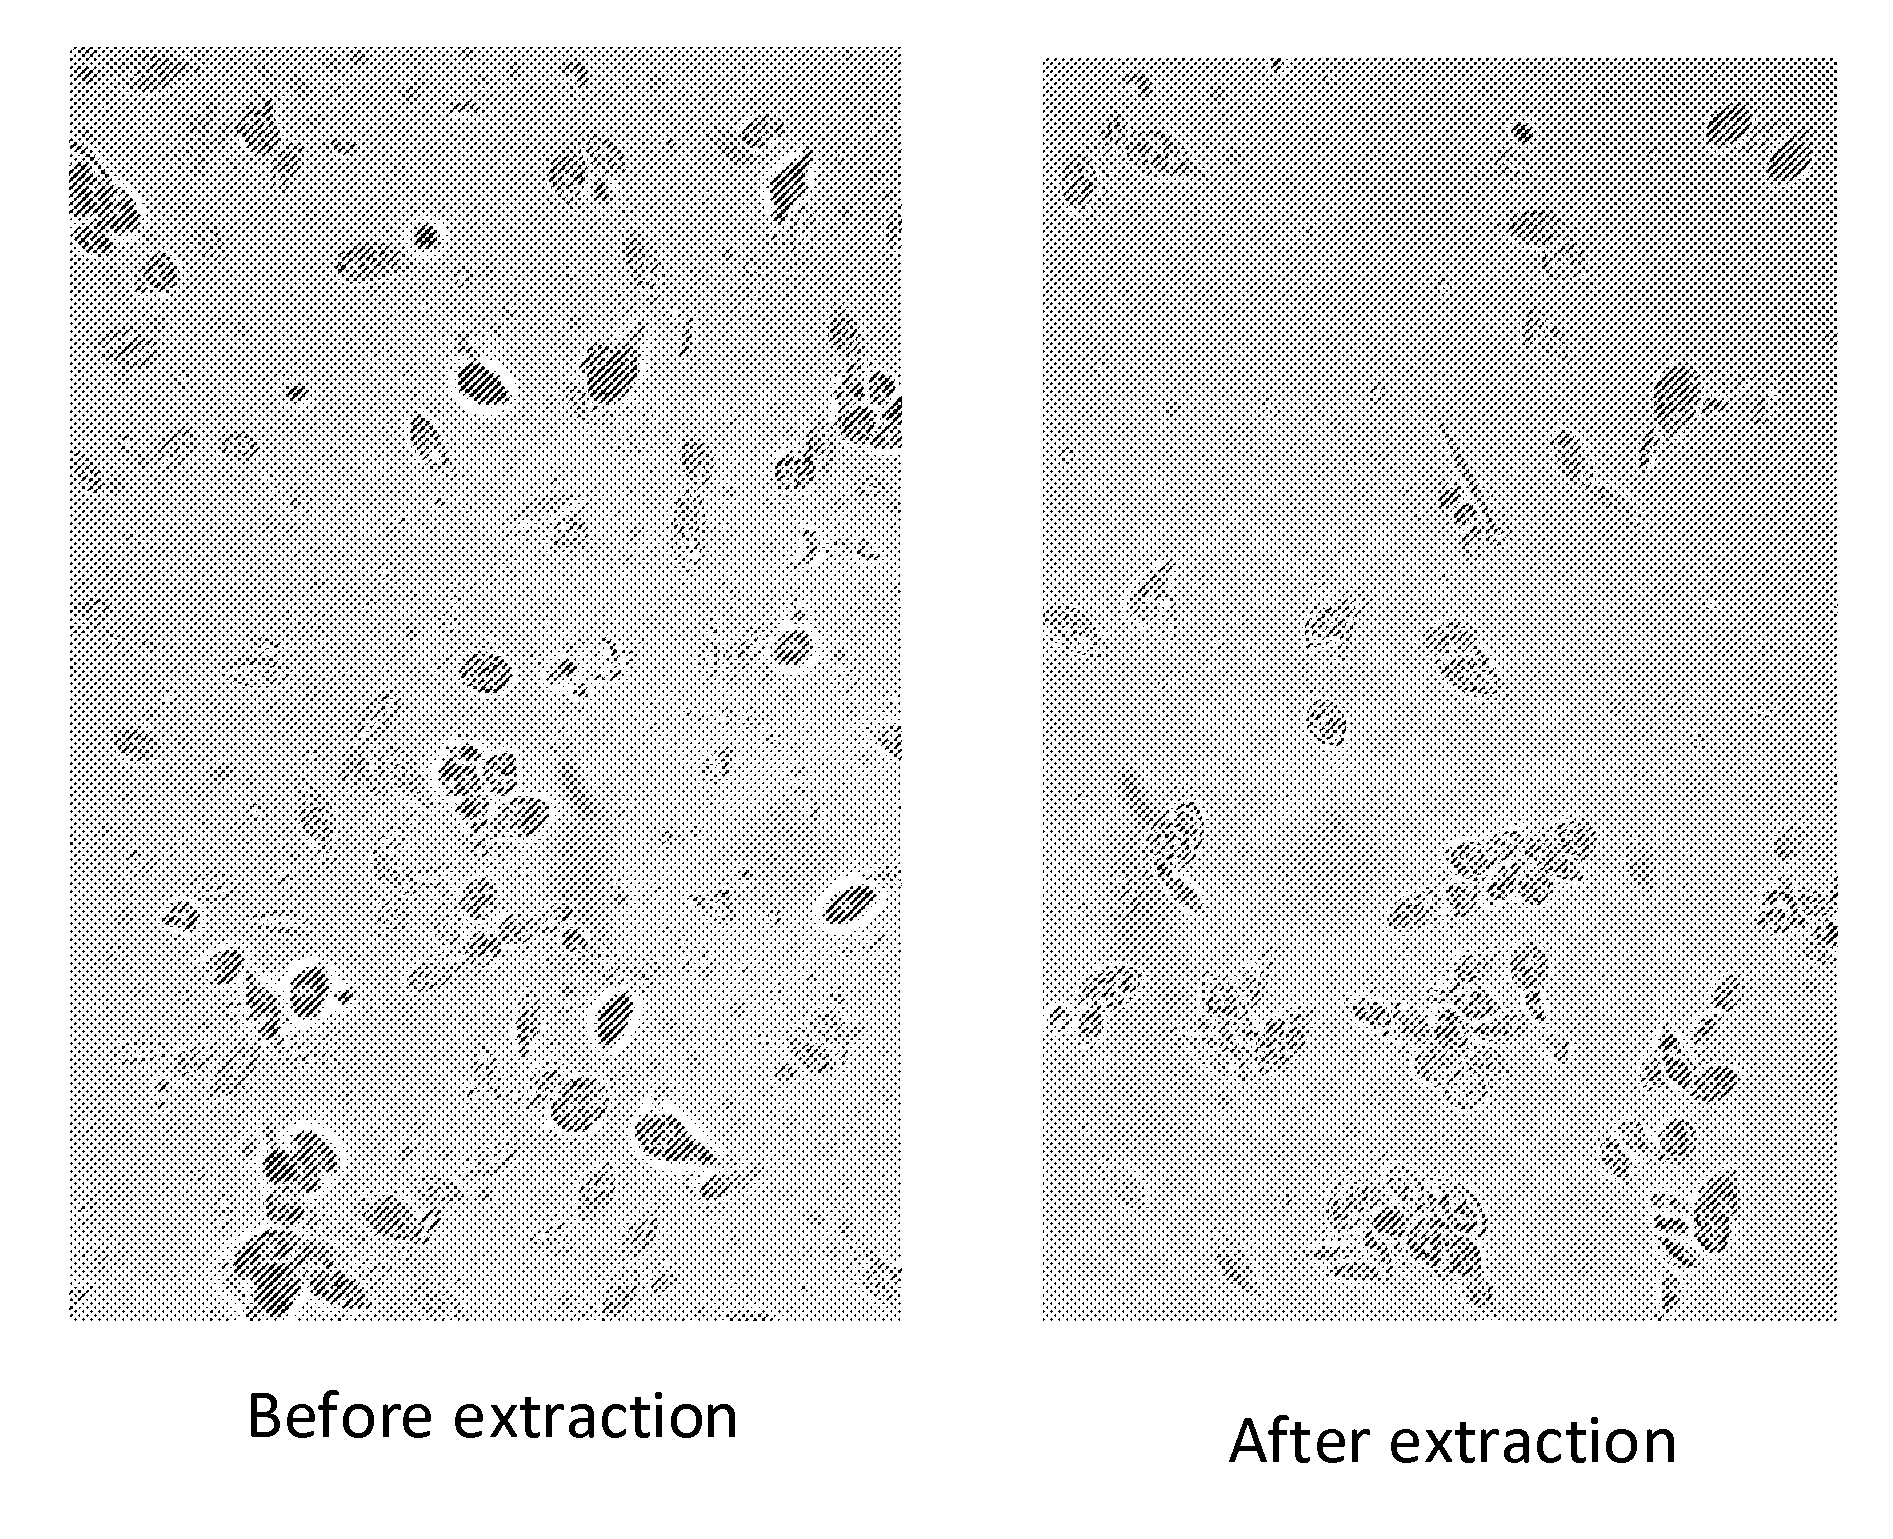 Extraction of proteins by a two solvent method